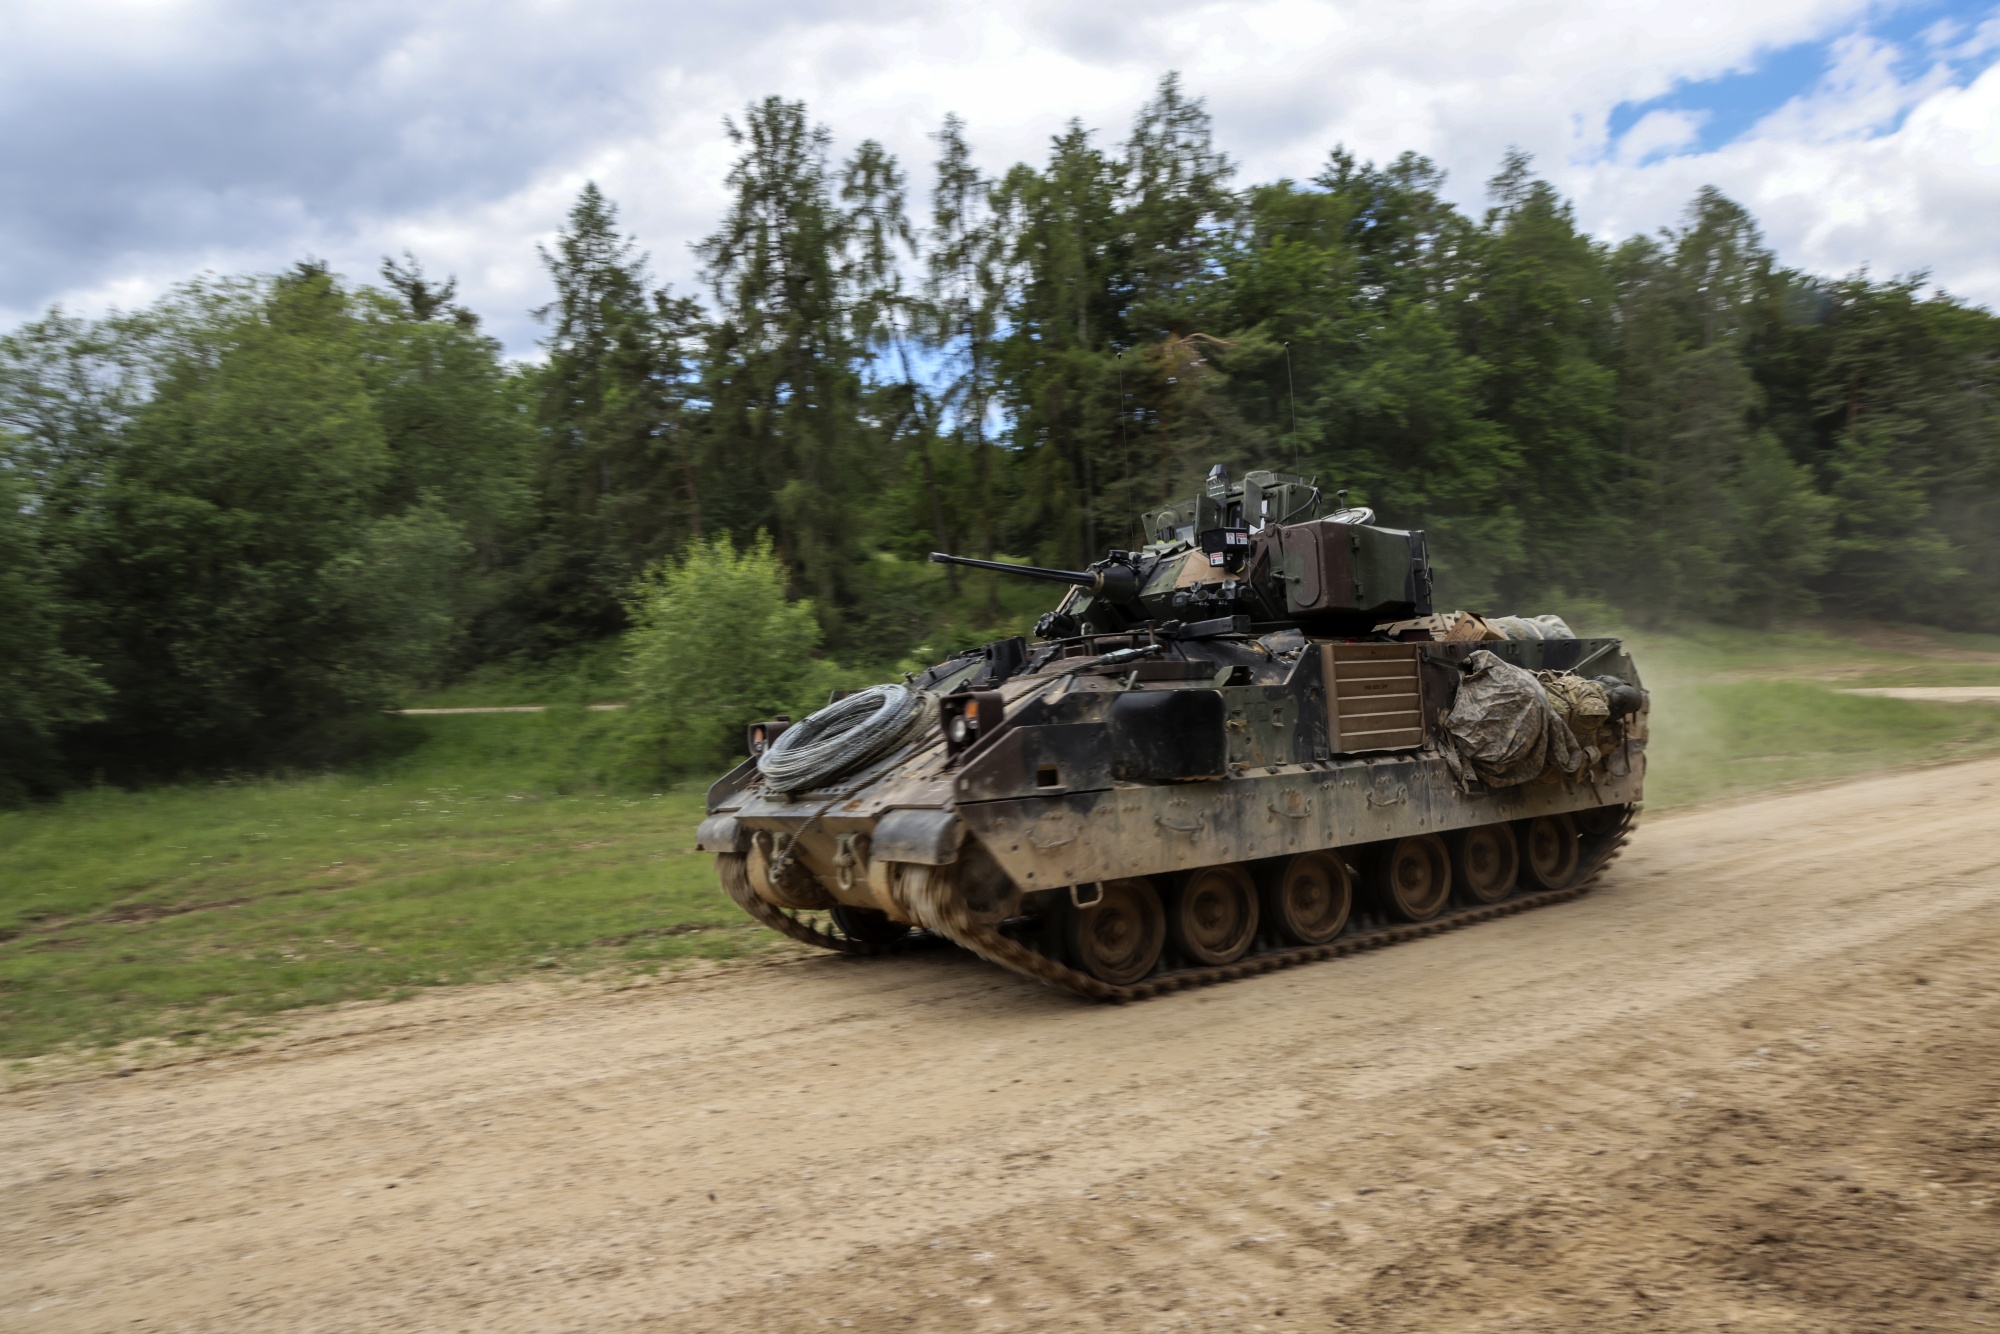 A US Army M2 Bradley infantry fighting vehicle during a training exercise in Germany in June. 